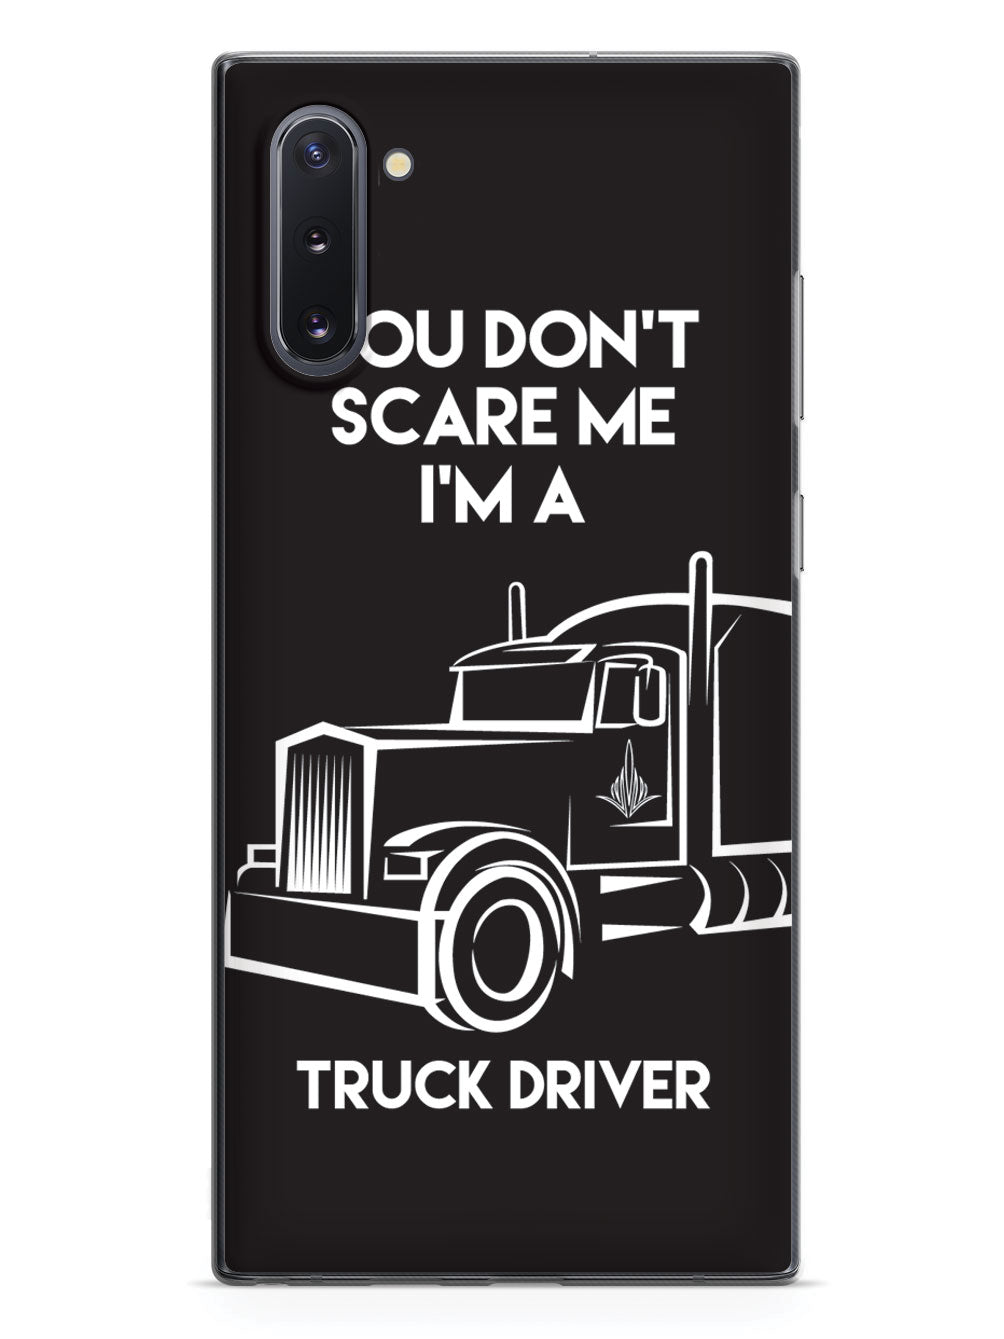 You Don't Scare Me, I'm a Truck Driver Case